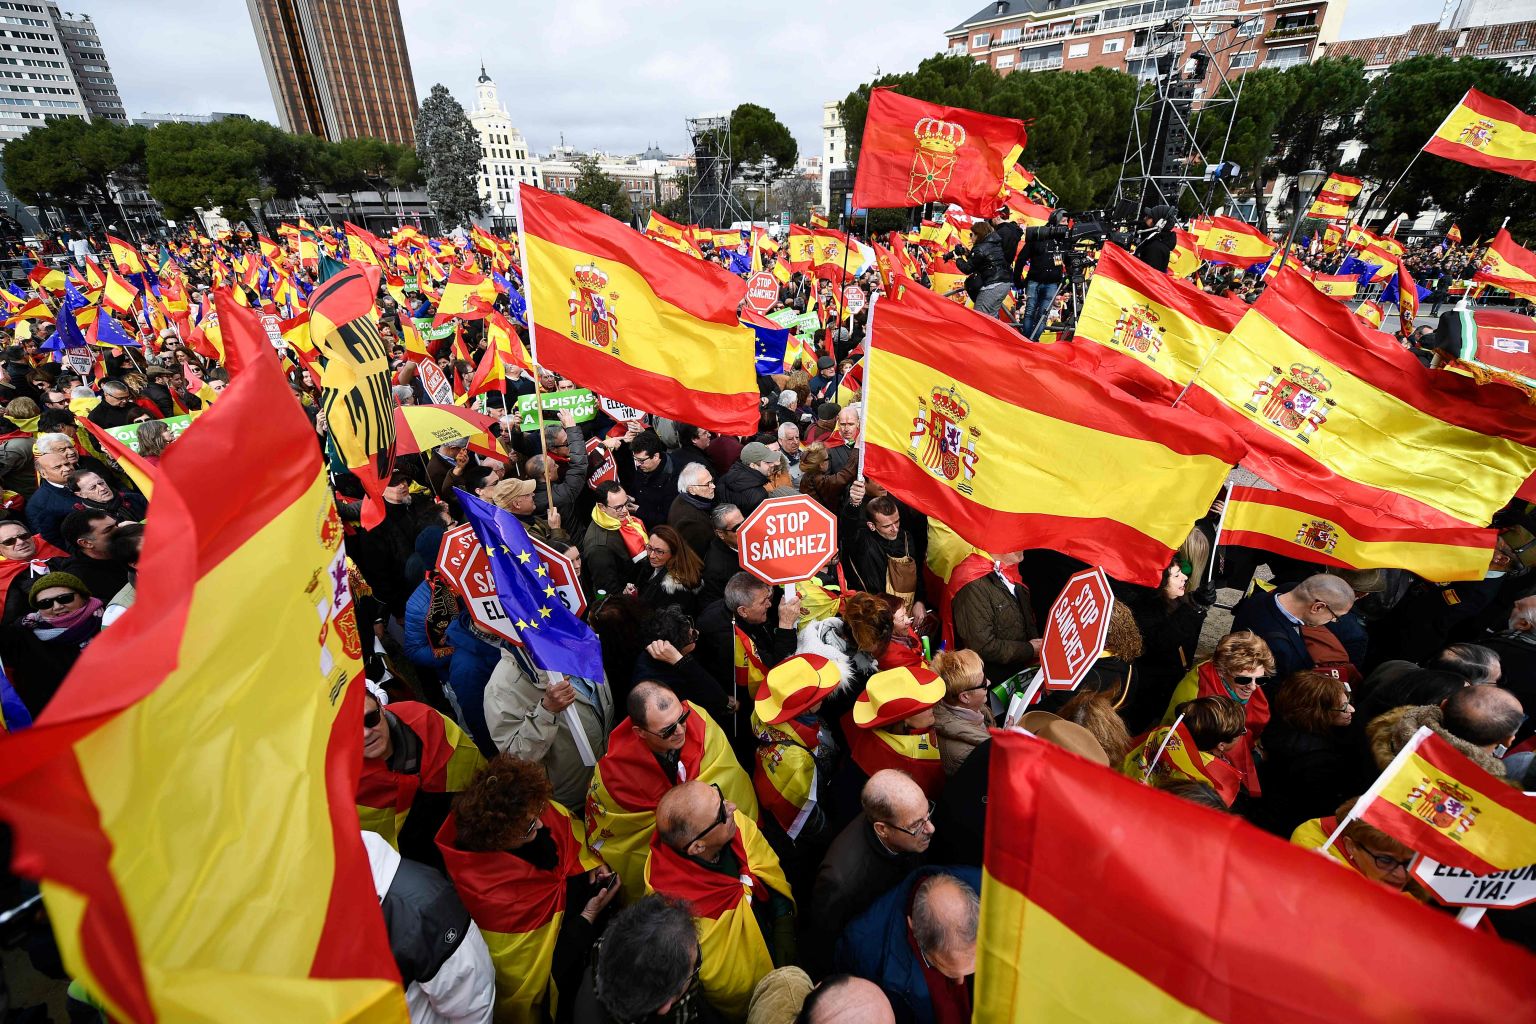 Thousands gathered in Spain to protest against Government